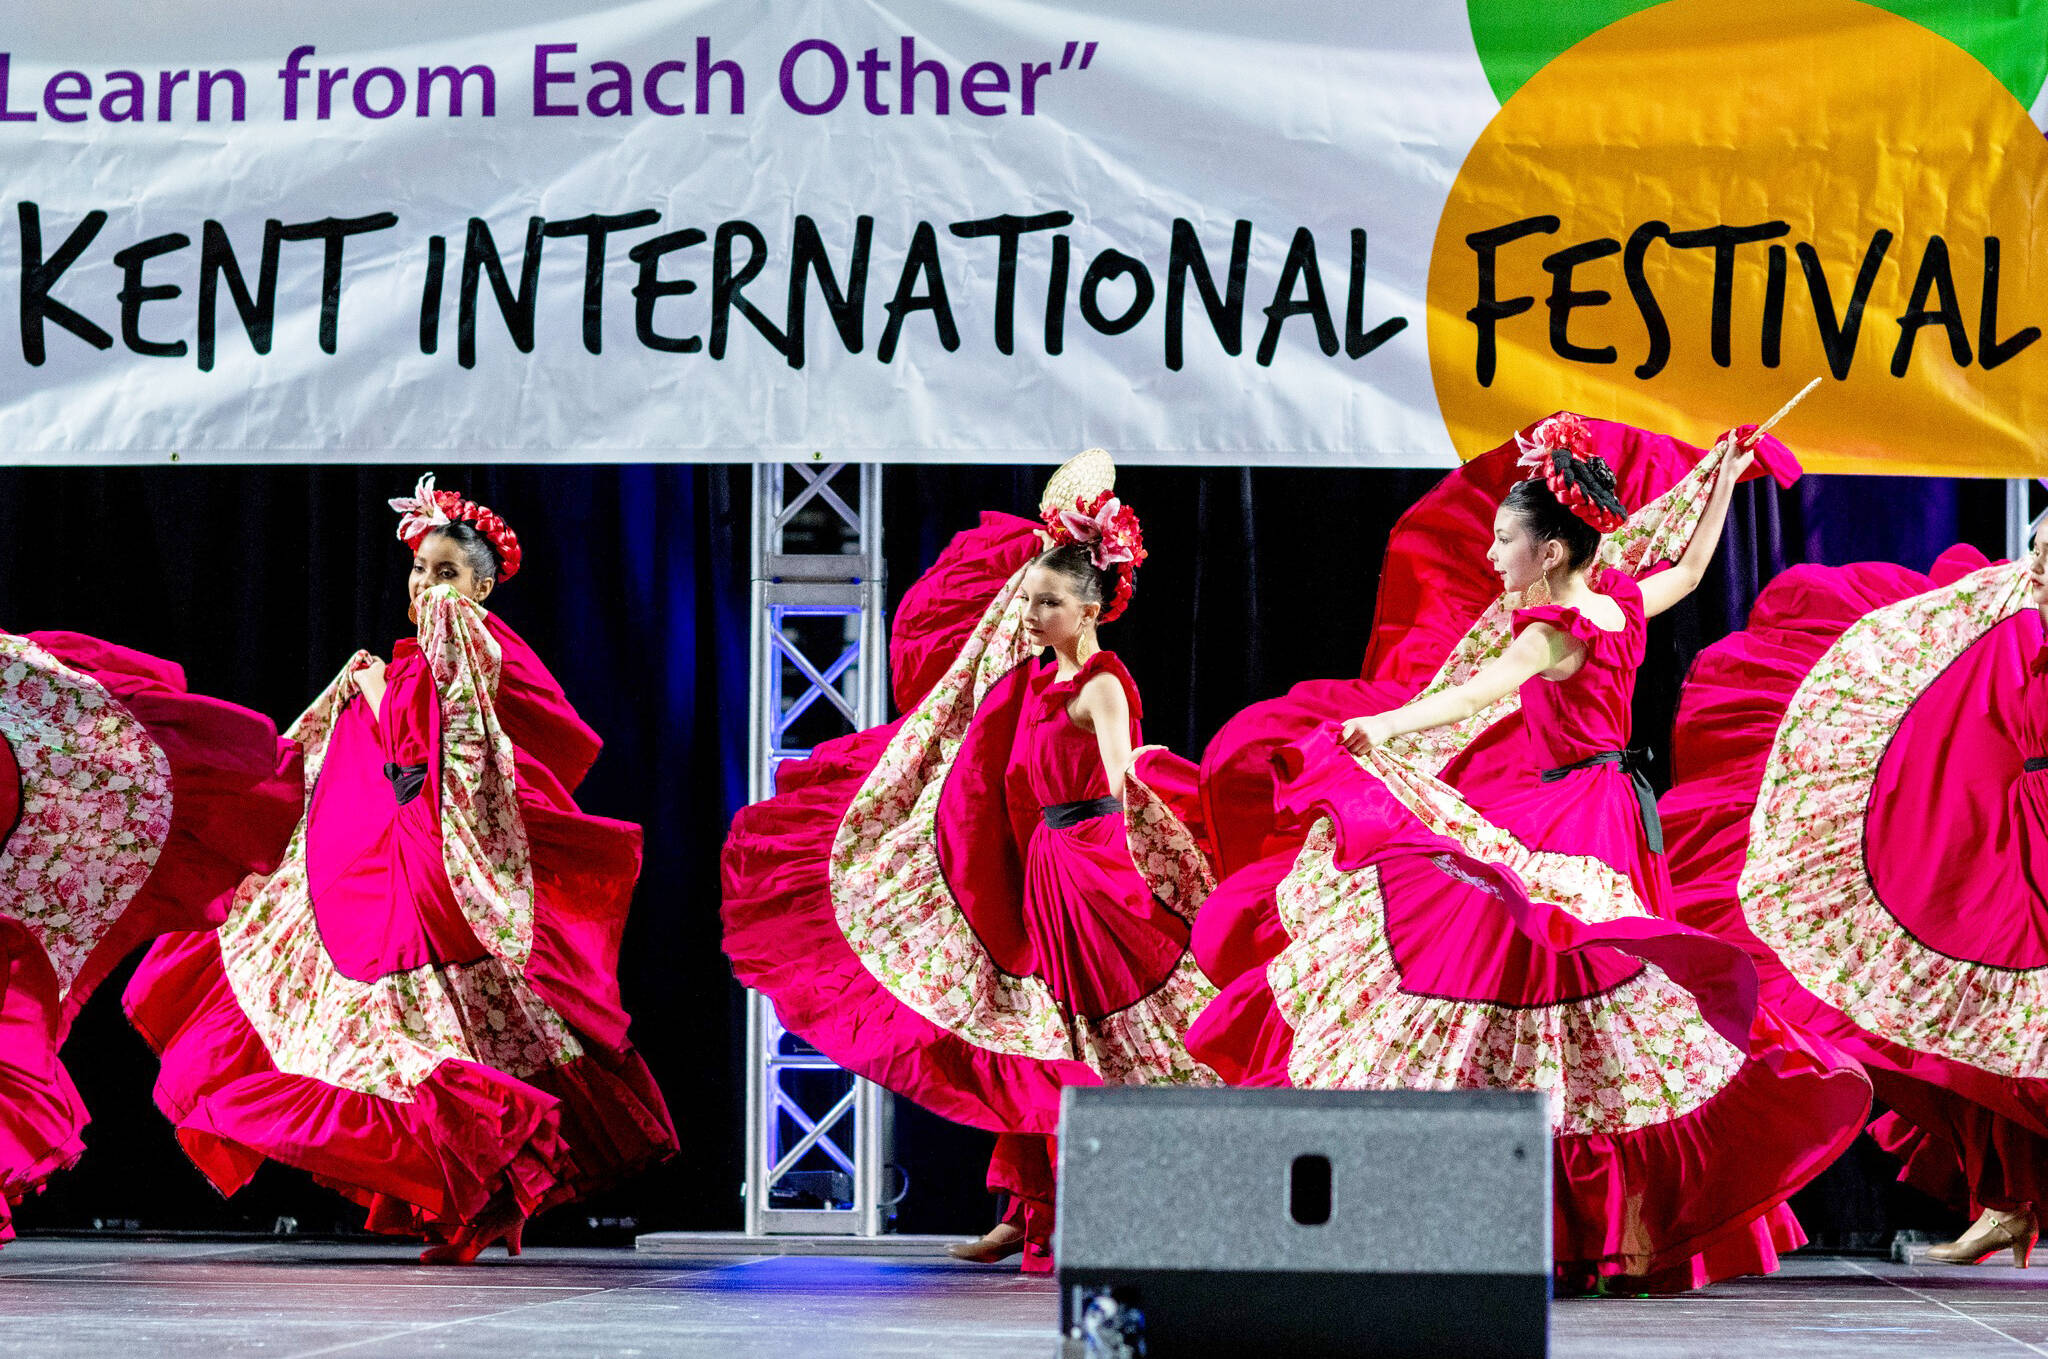 The Kent International Festival is from 10 a.m. to 5 p.m. on Saturday, June 1 at the accesso ShoWare Center. COURTESY PHOTO, Kent International Festival